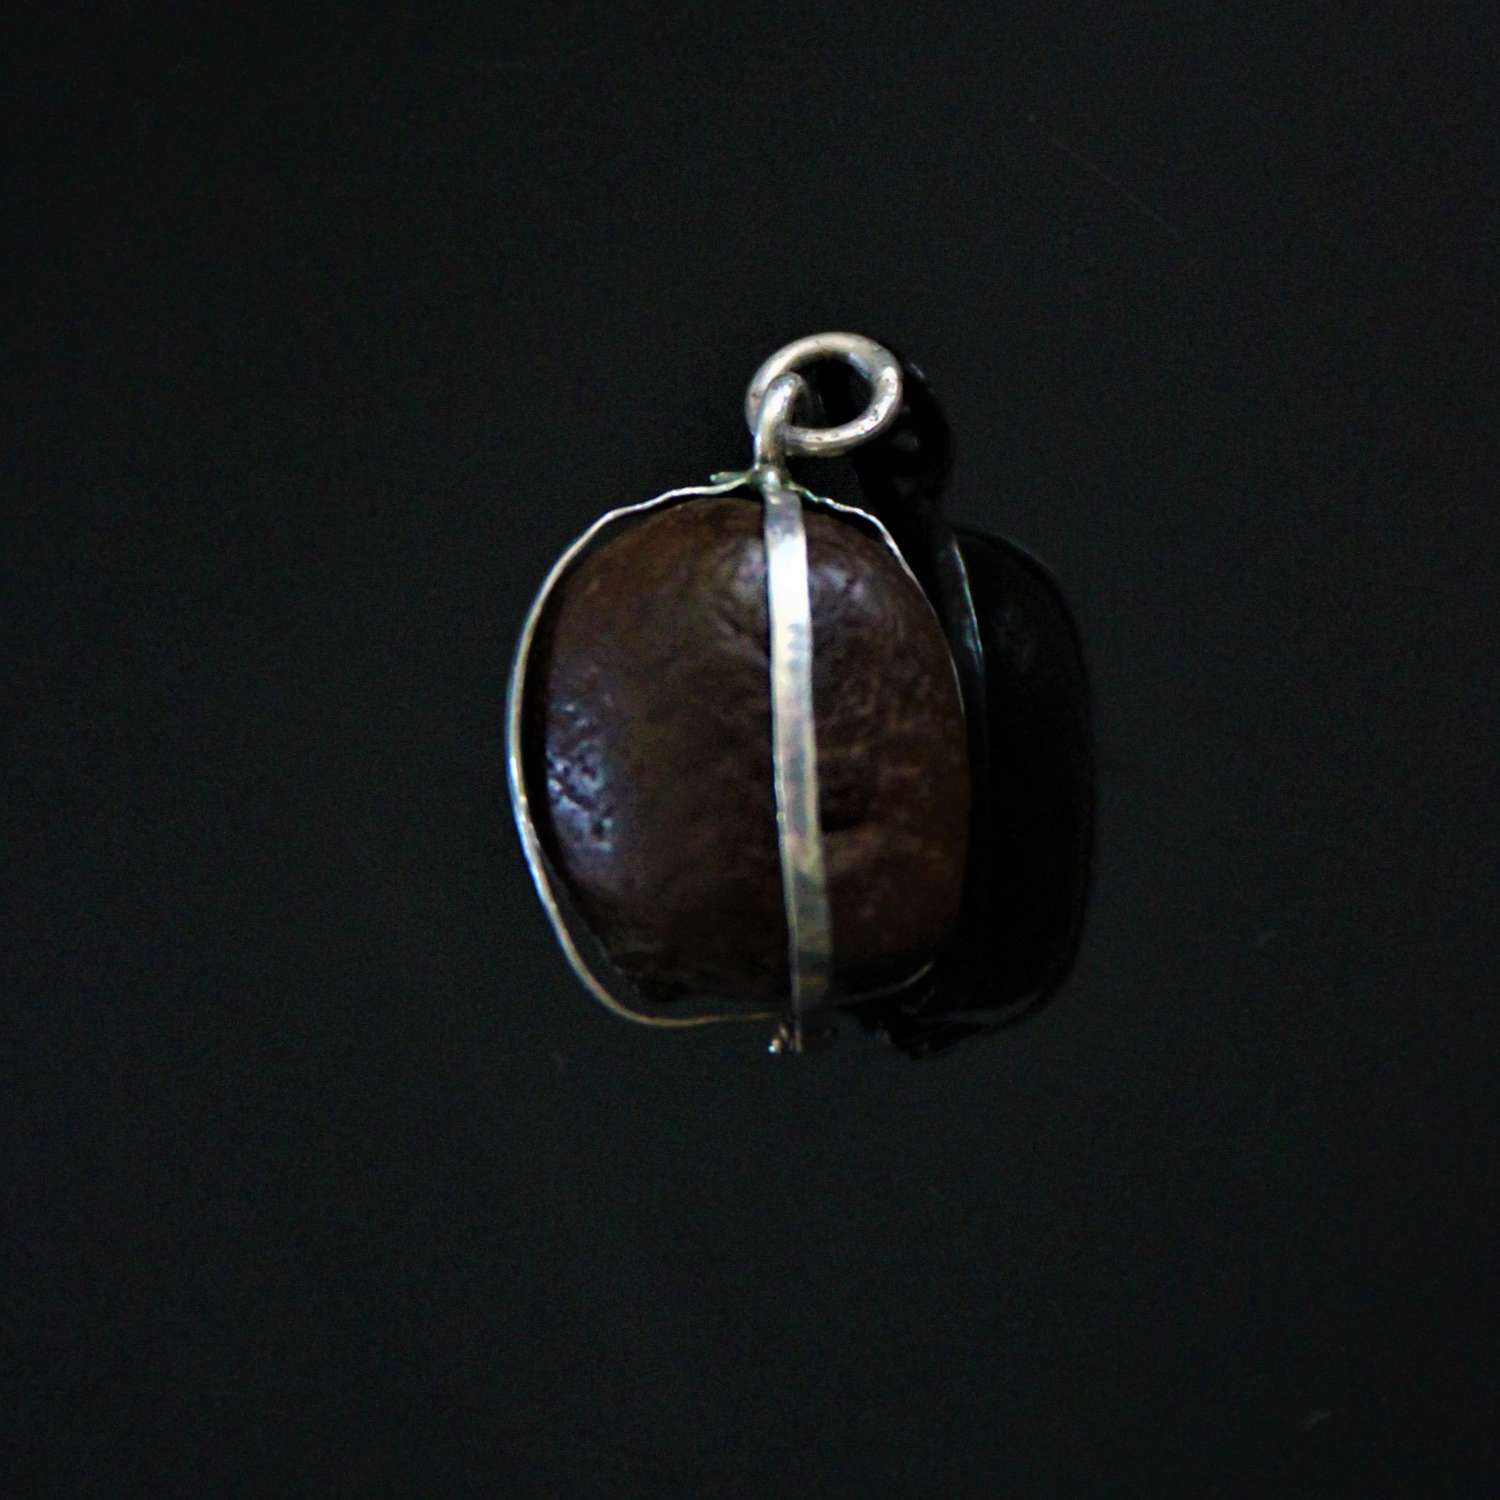 A rare Eaglestone or Aetites amulet or talisman mounted in silver